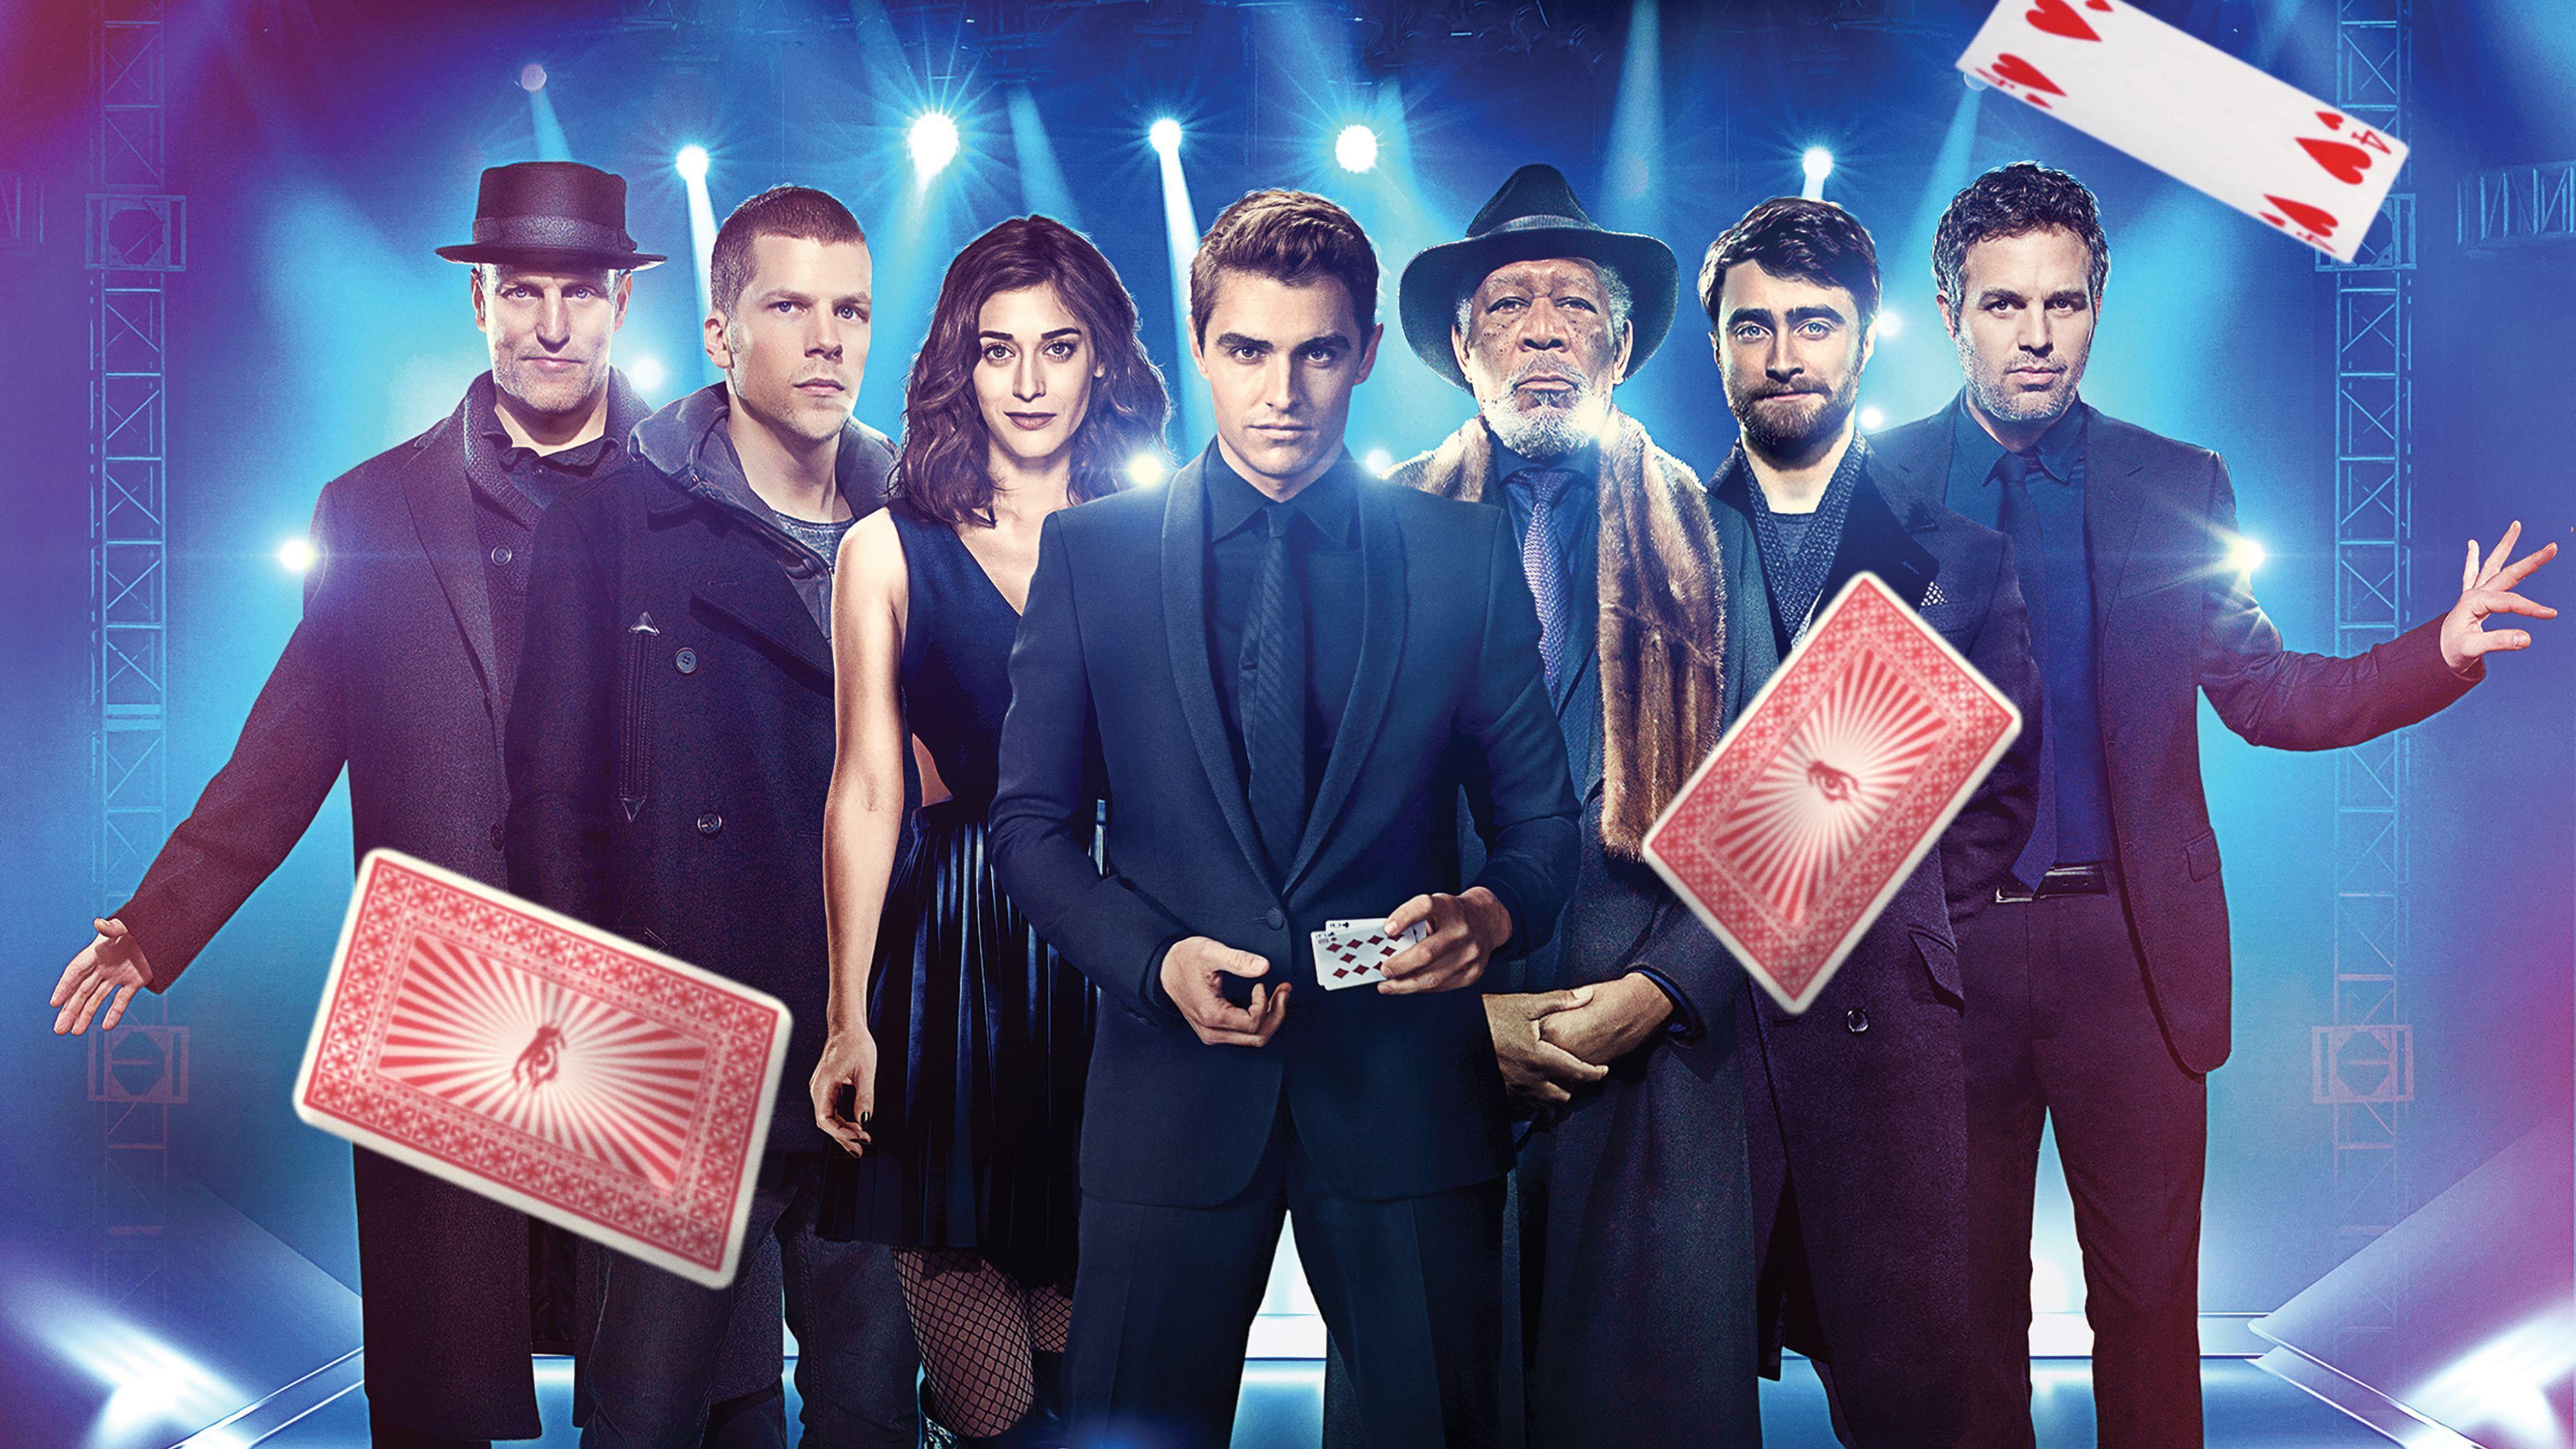 Now You See Me Wallpapers